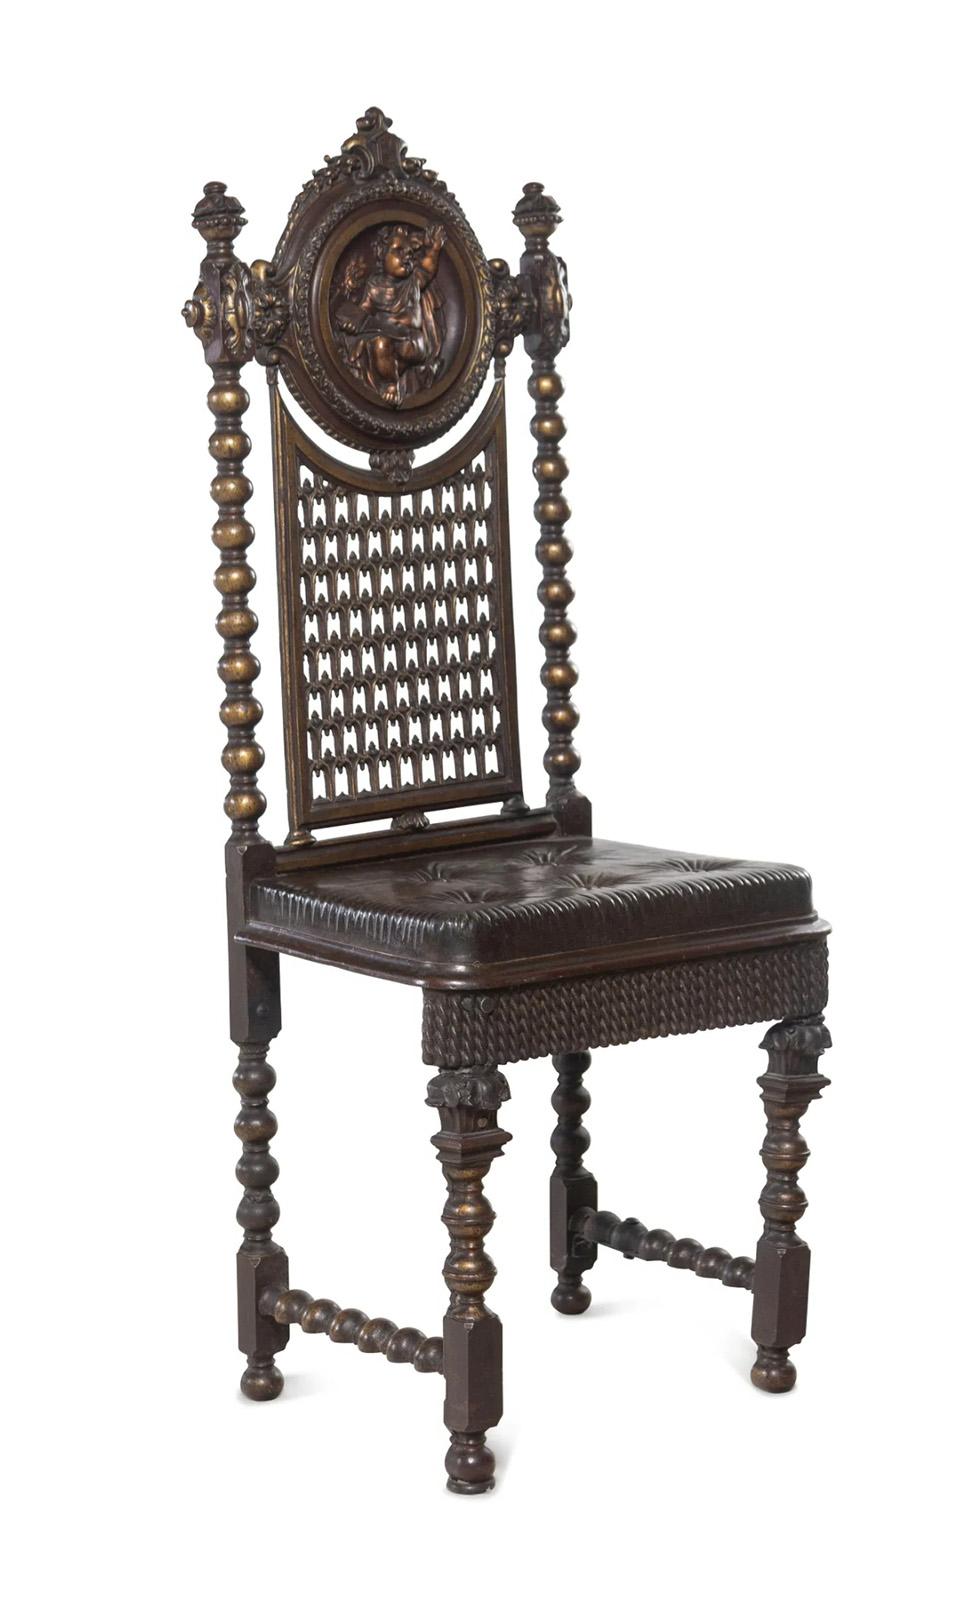 19th Century English Renaissance Revival Style Bronzed Metal Chair For Sale 1